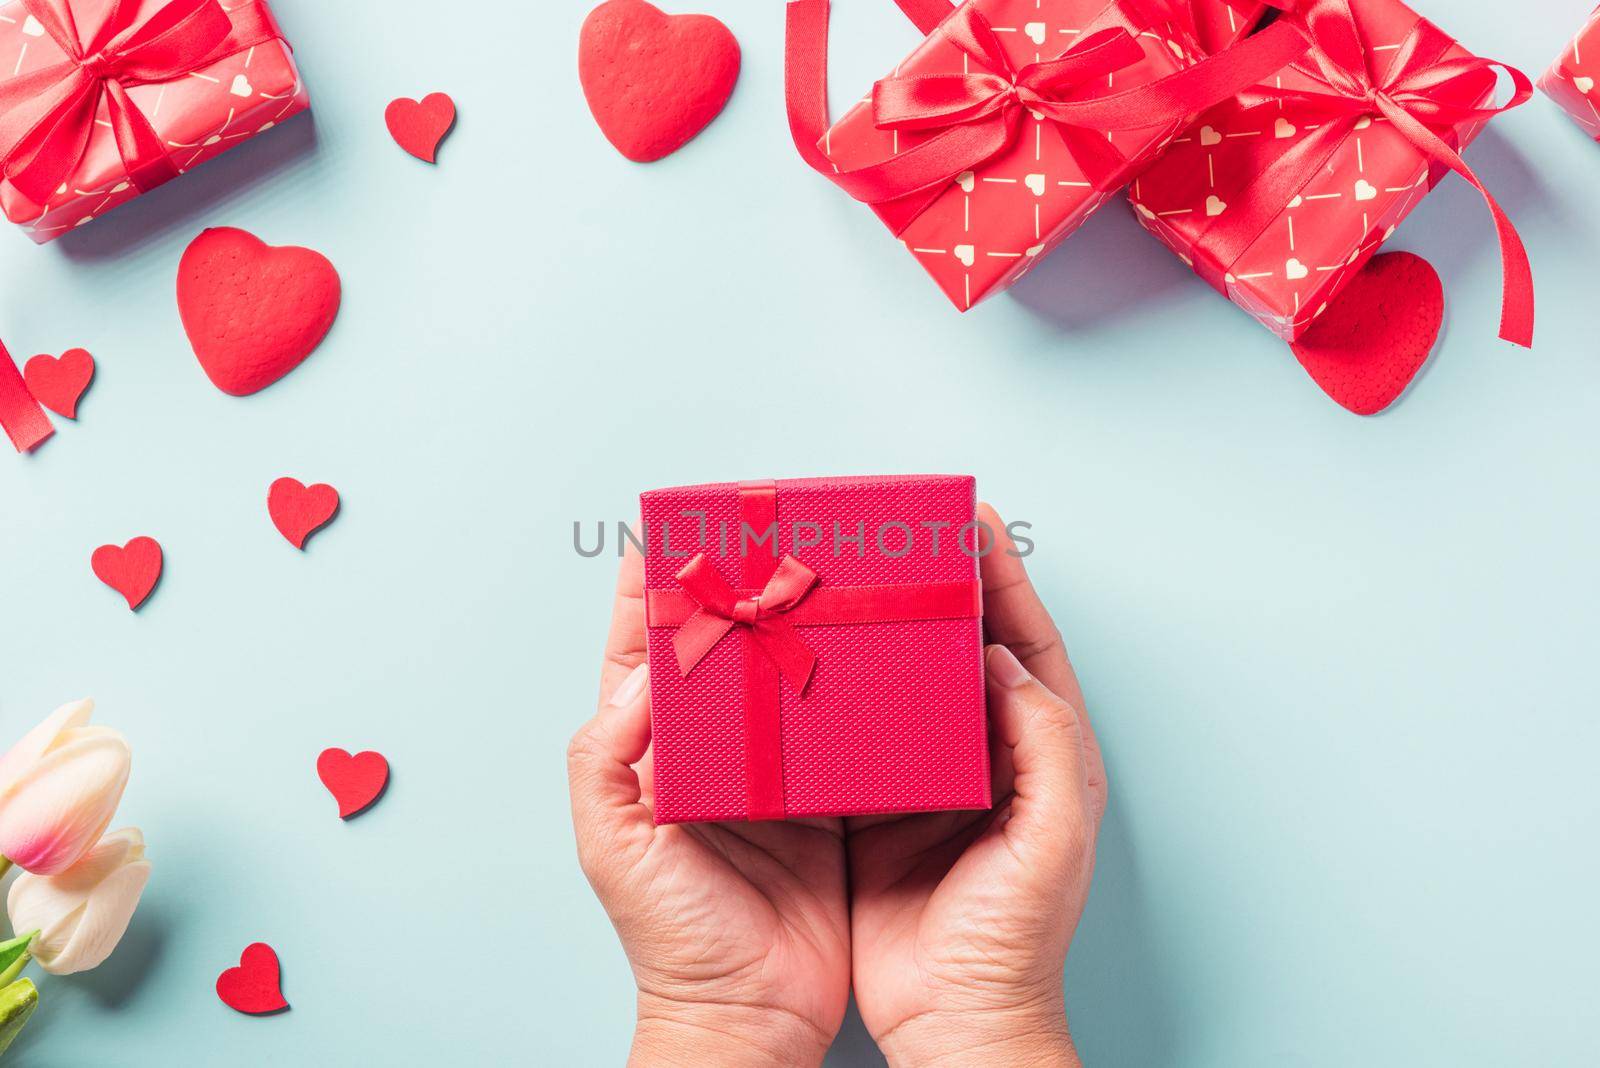 Valentine's day and birthday. Woman hands holding gift or present box decorated and red heart surprise on blue background, Female's hand hold gift box package in craft paper Top view flat lay